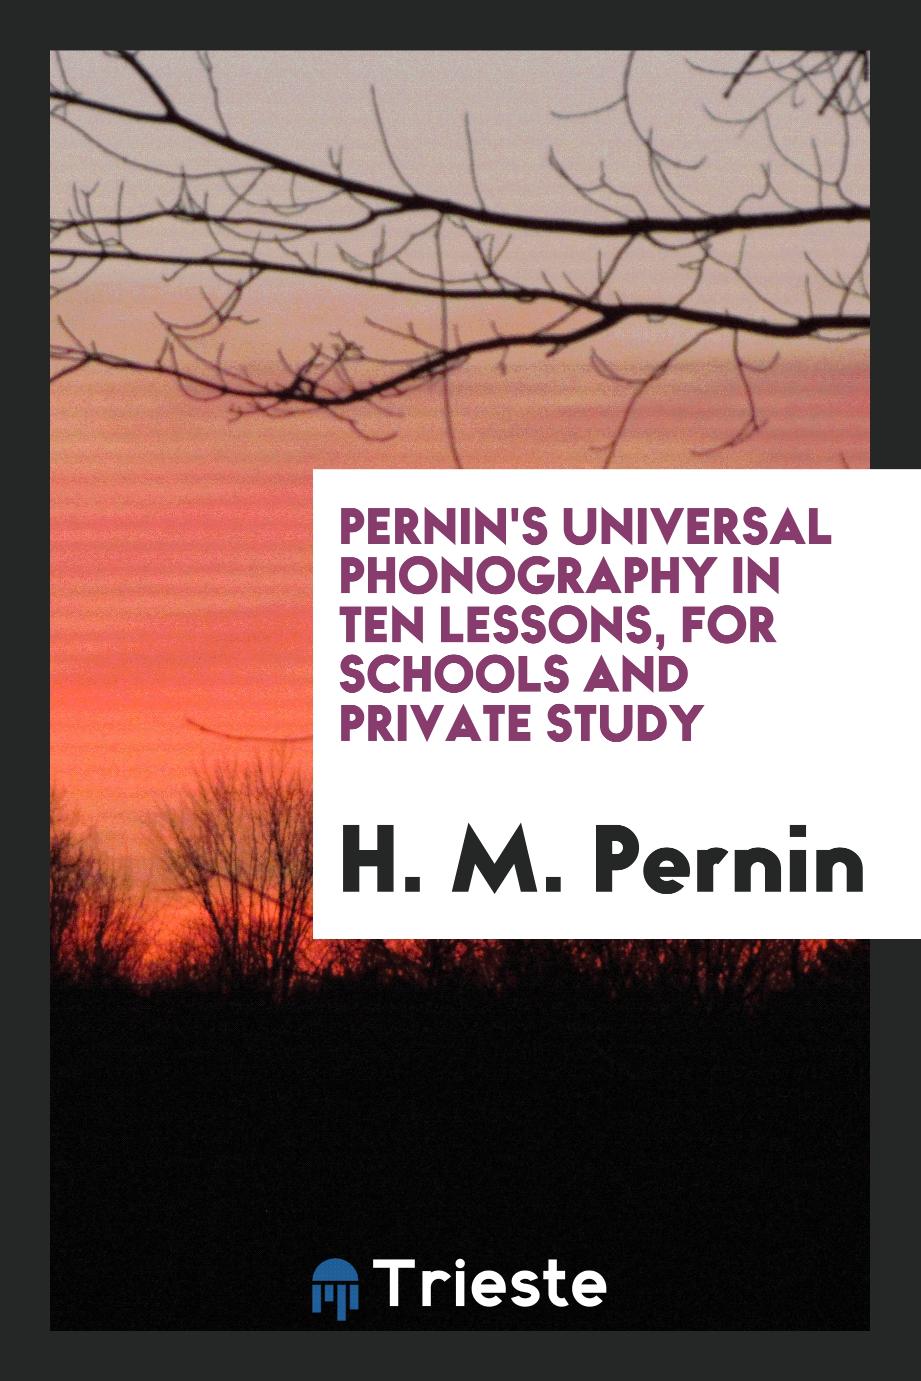 Pernin's Universal phonography in ten lessons, for schools and private study